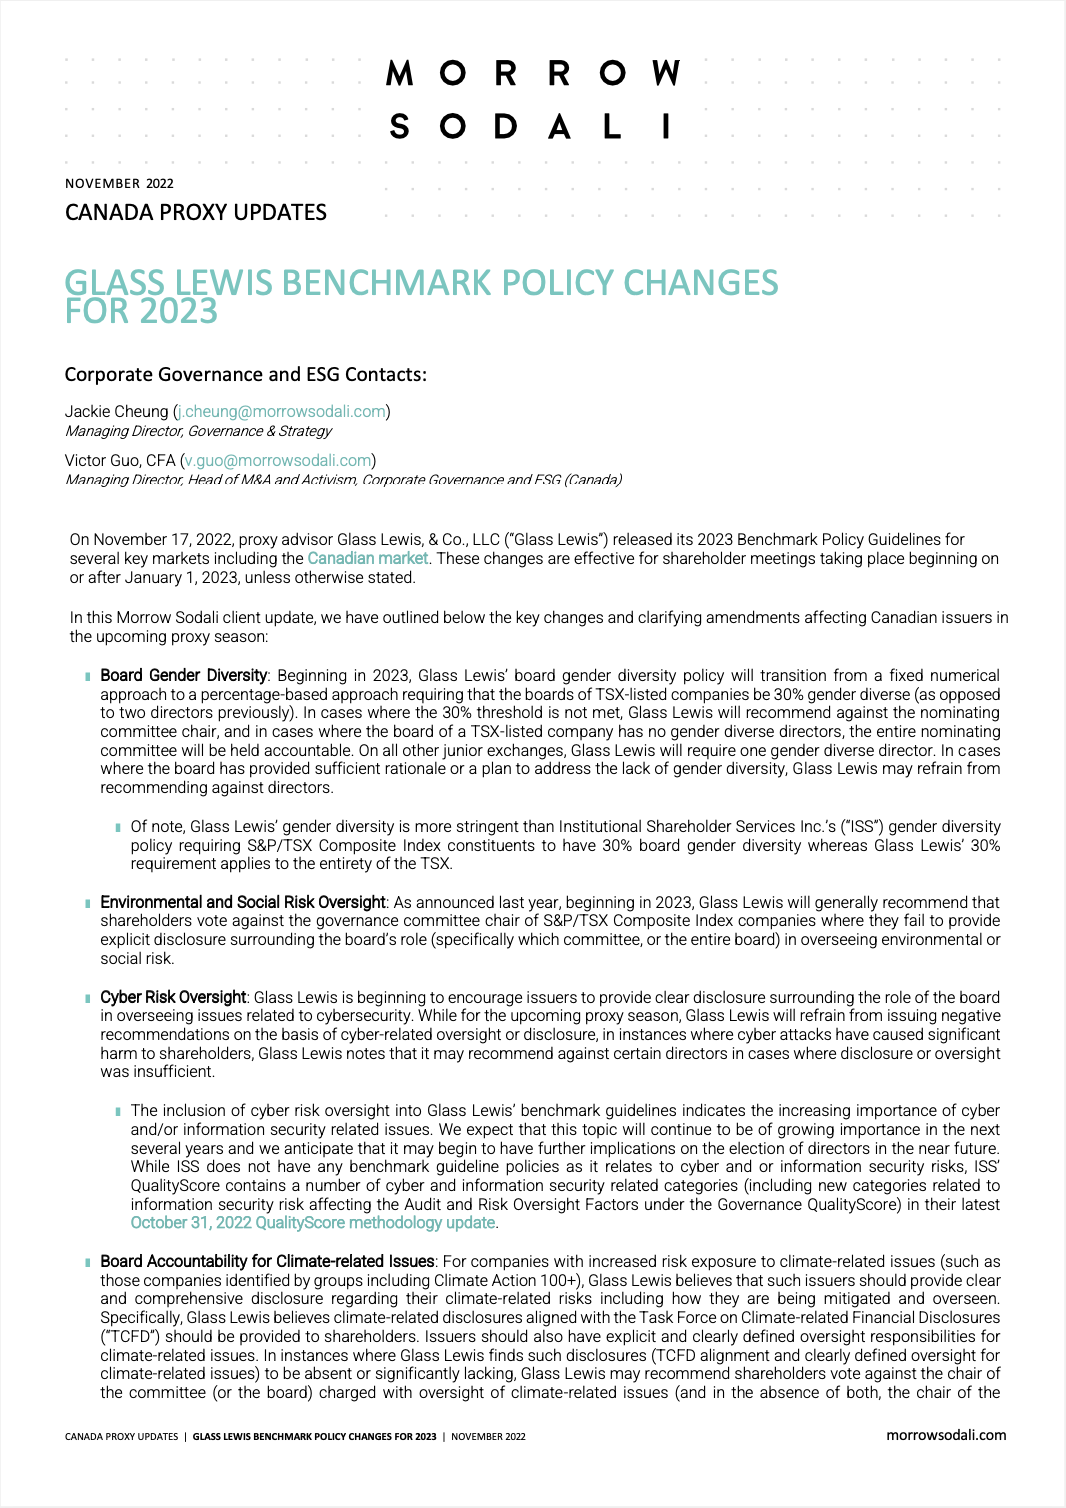 GLASS LEWIS CANADIAN BENCHMARK POLICY CHANGES FOR 2023